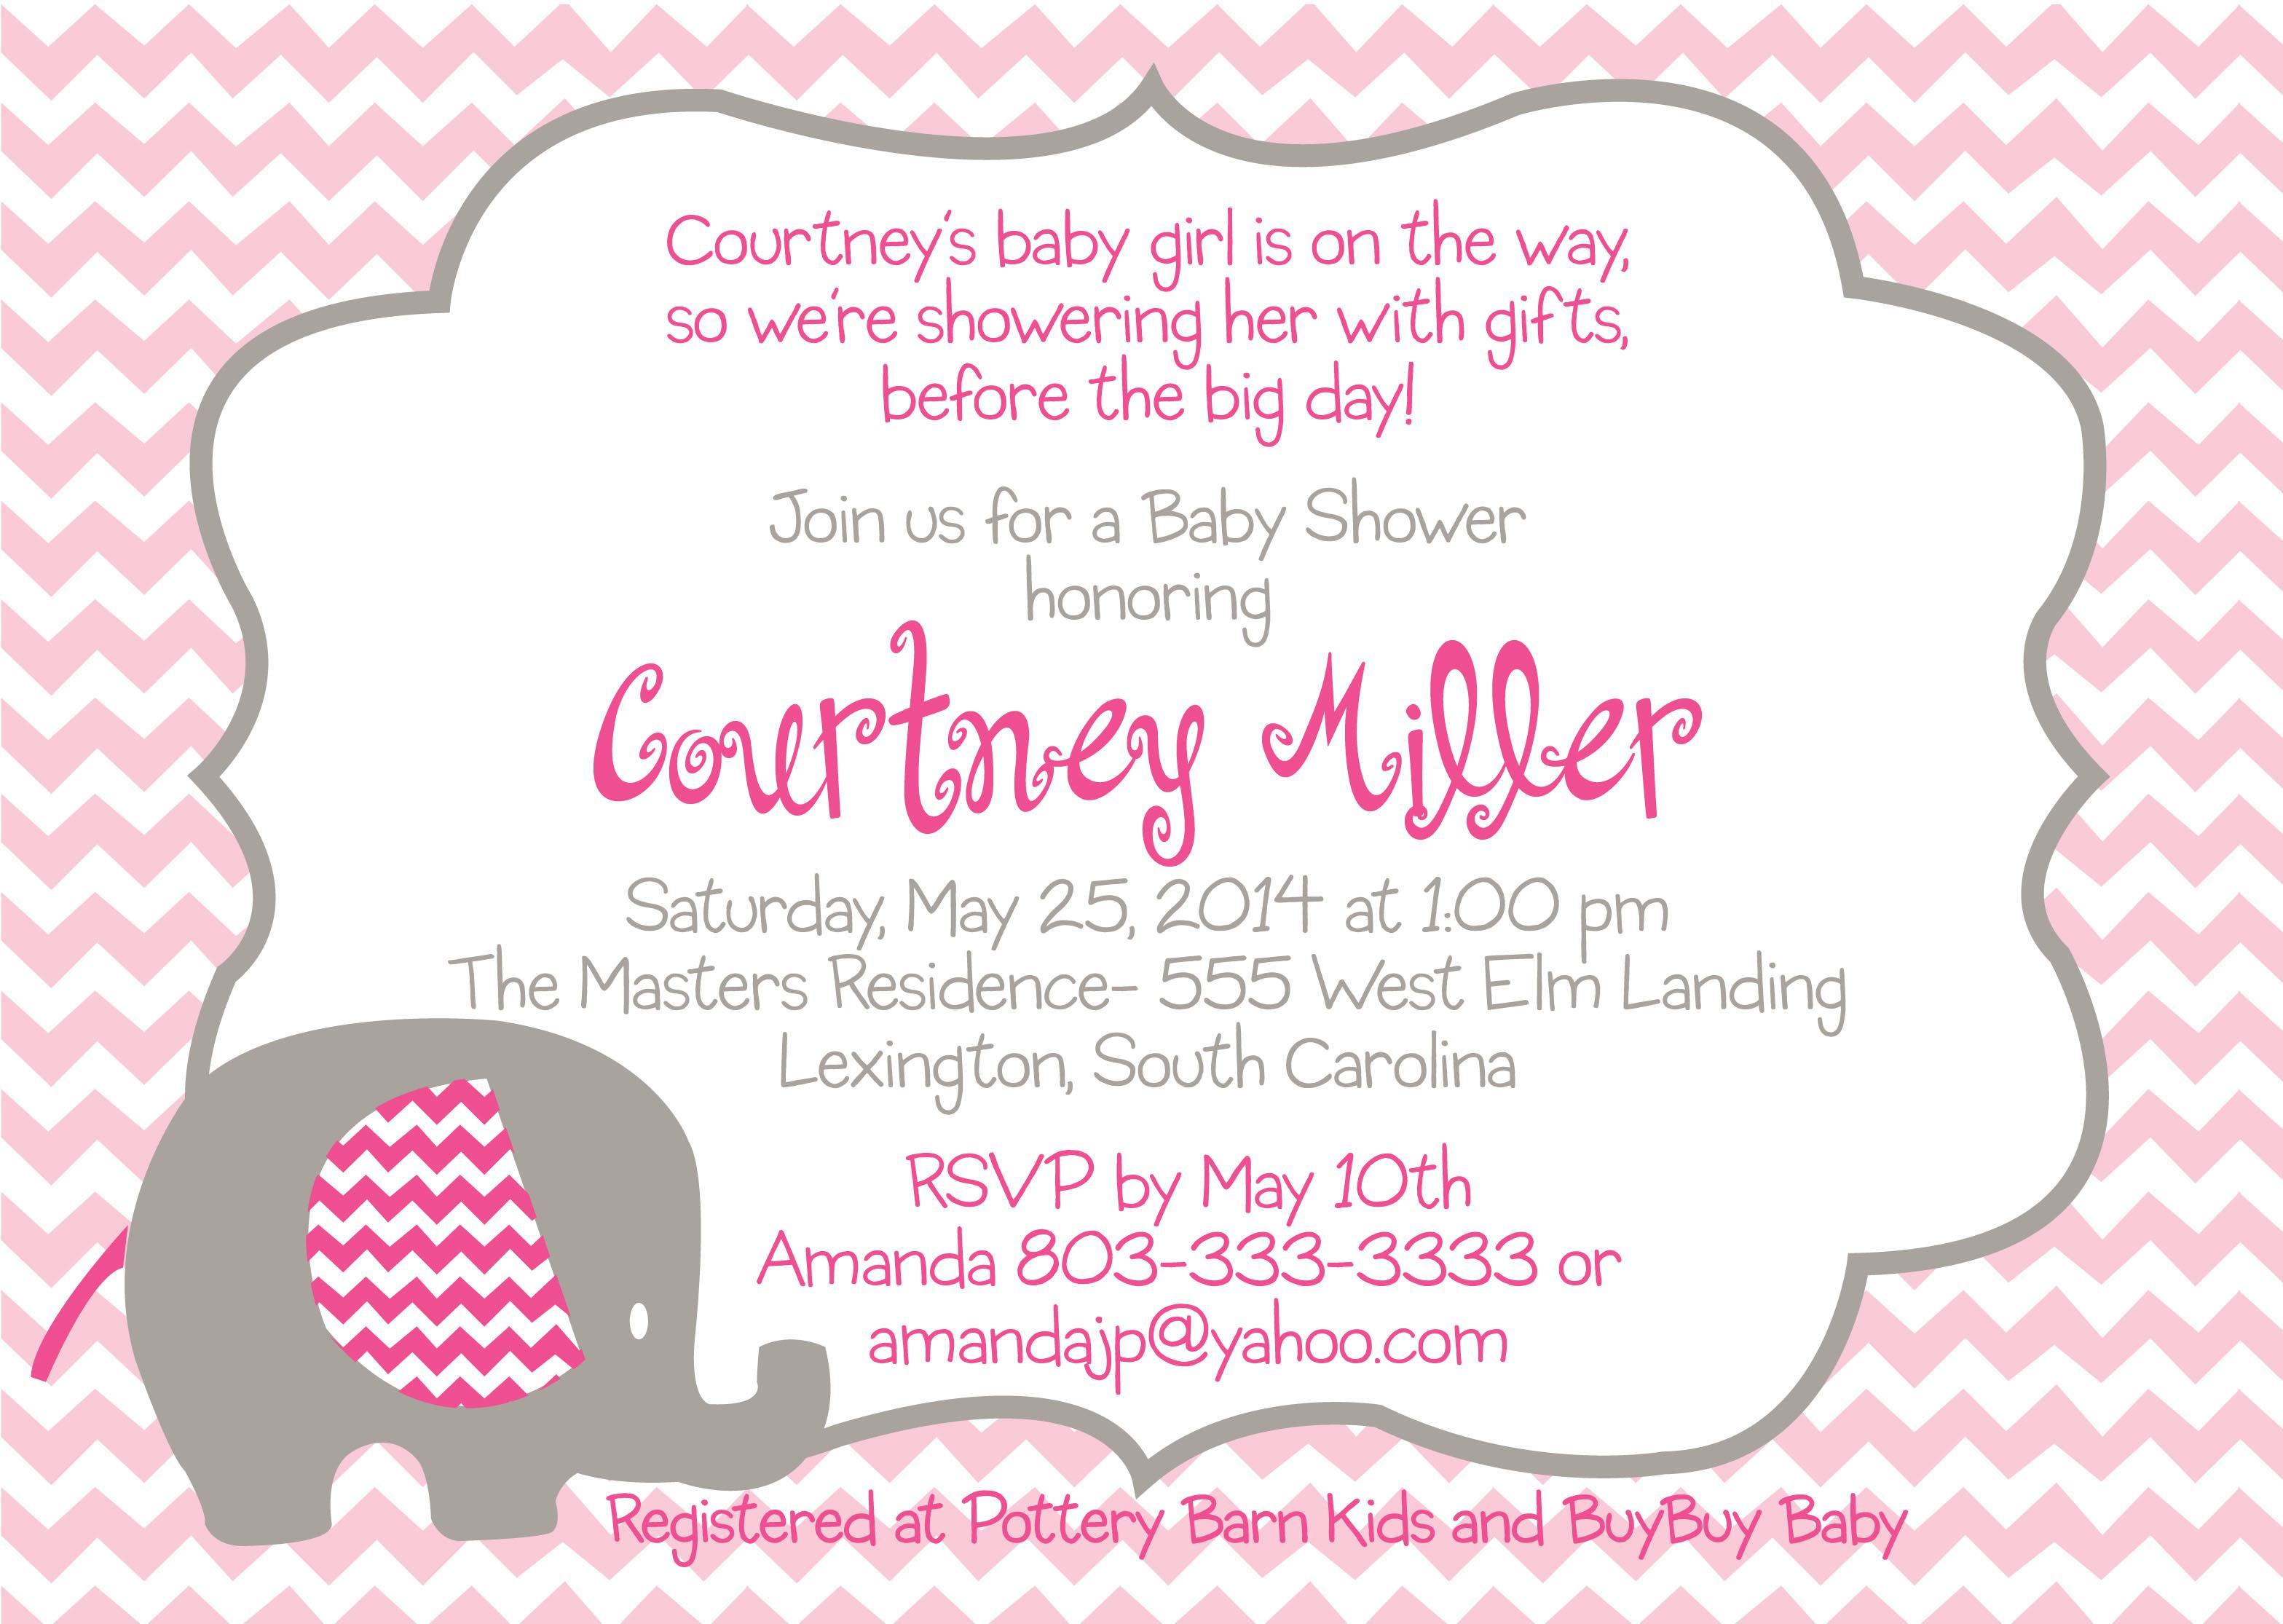 Full Size of Baby Shower:delightful Baby Shower Invitation Wording Picture Designs Baby Shower Invitation Wording Baby Invitations Templates New Wording For Baby Shower Invitation Wording For Baby Shower